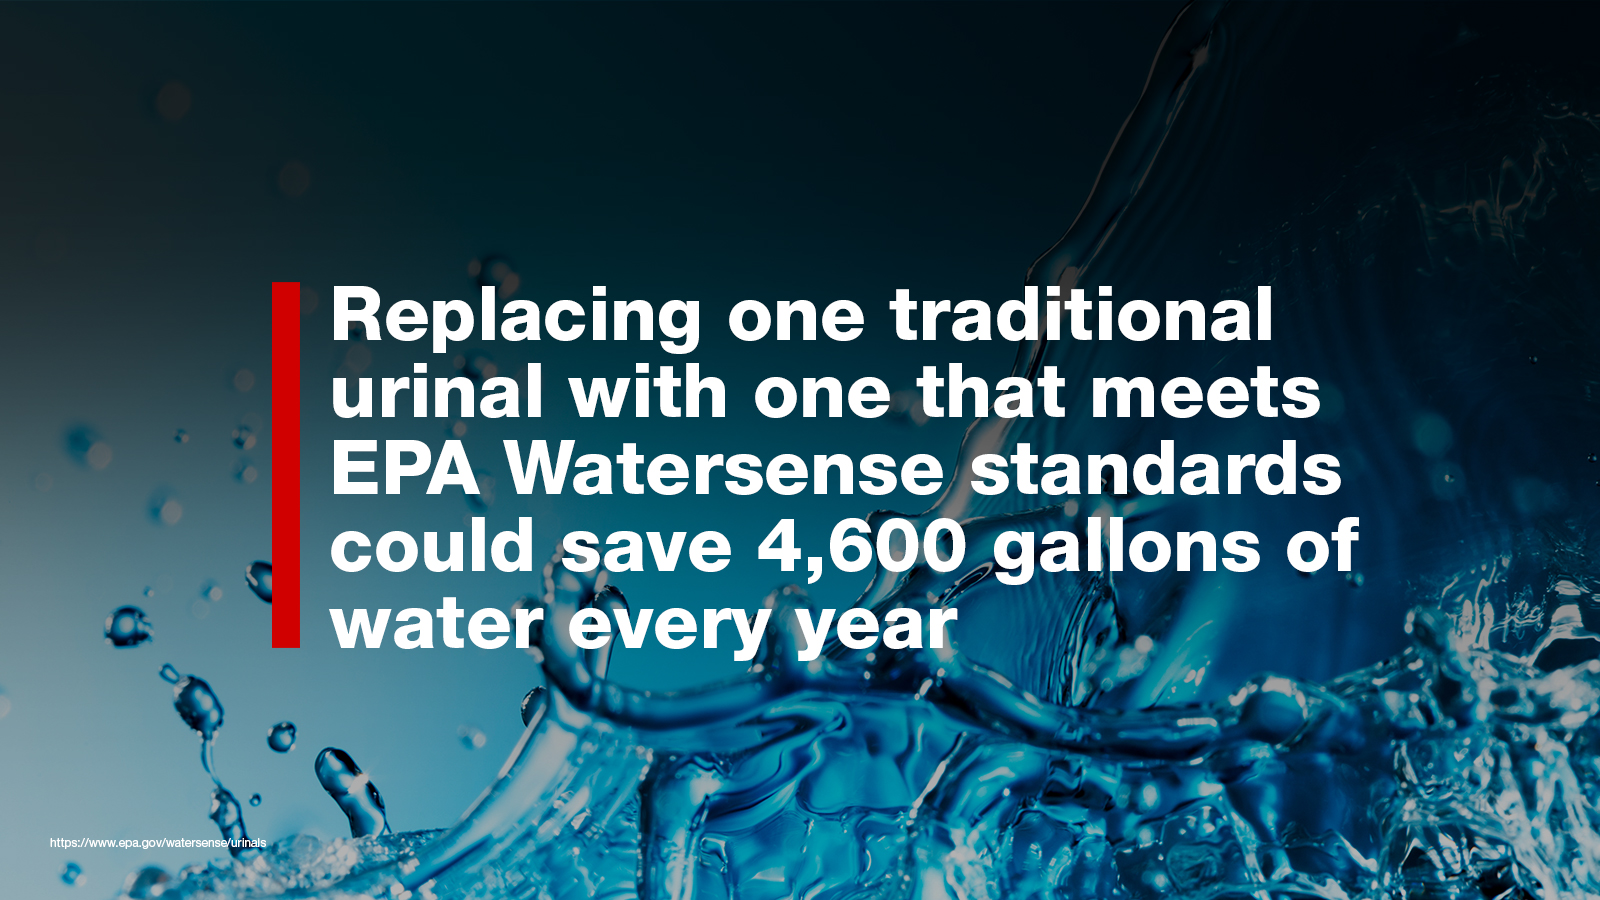 Replacing a urinal with one meeting EPA Watersense standards could save 4,600 gallons annually